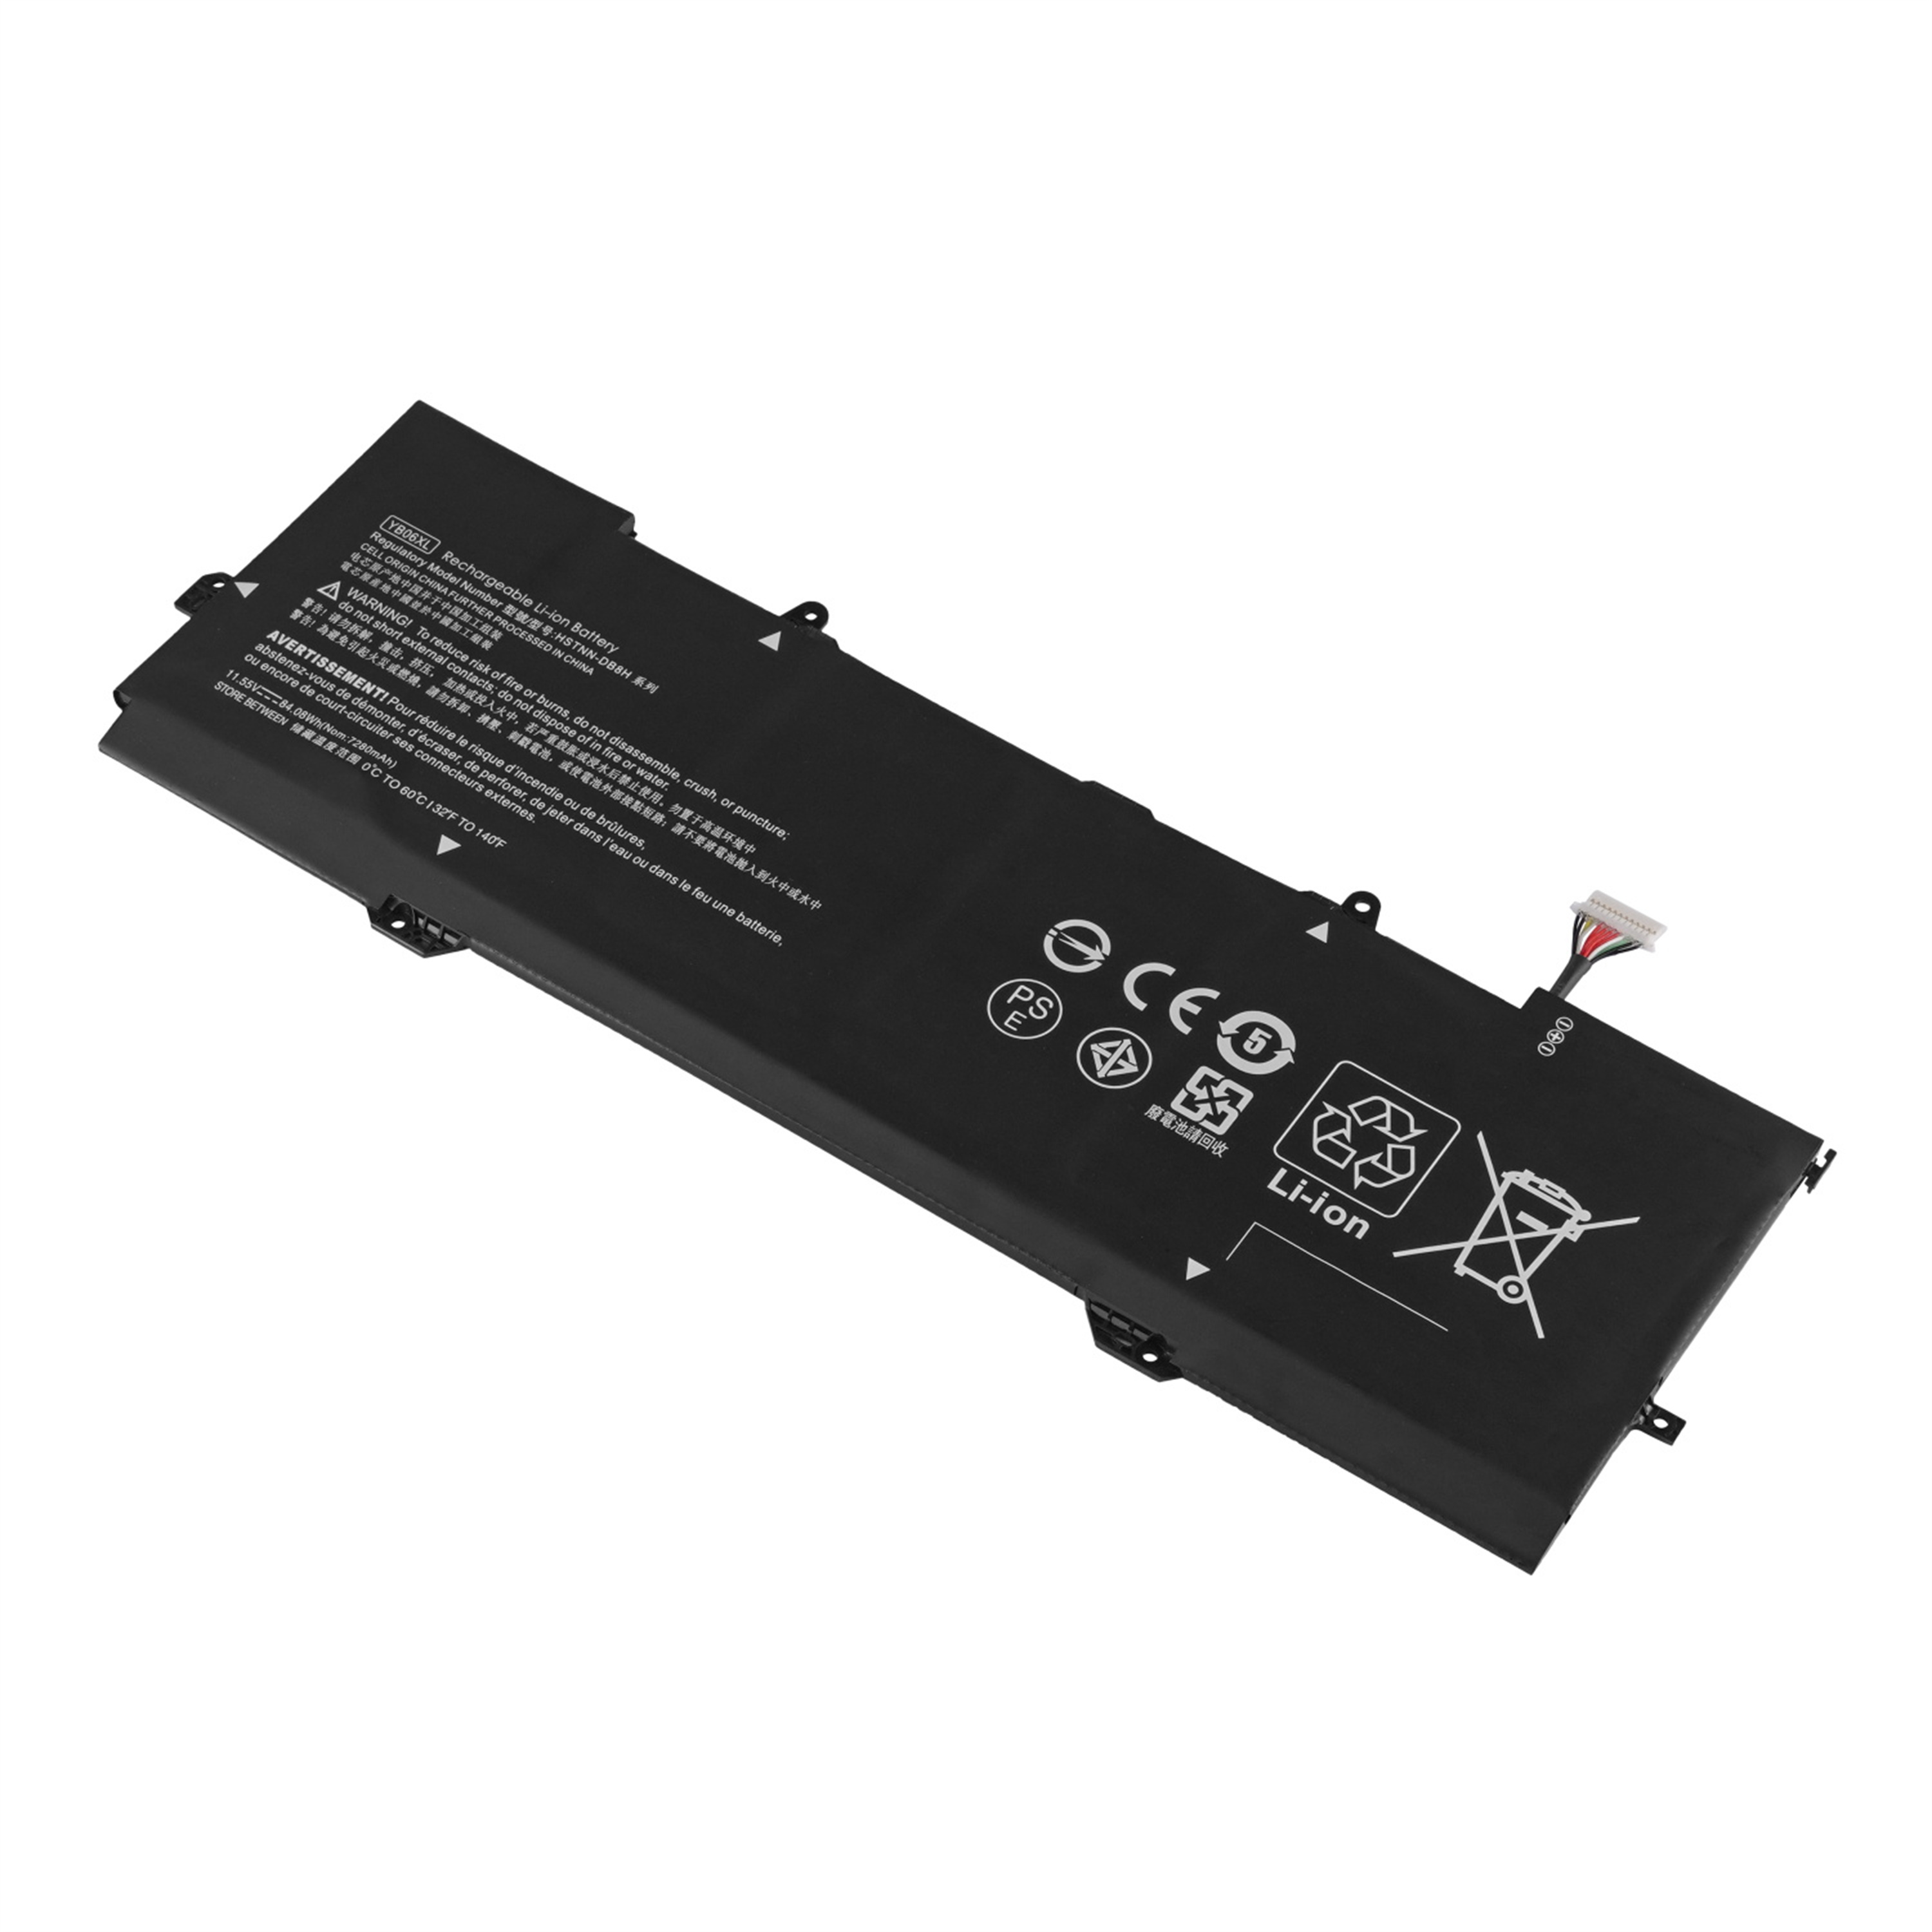 YB06XL rechargeable lithium ion Notebook battery Laptop battery For Hp HSTNN-DB8H 928427-271 3ICP5/50/83-2 Seires 11.55v 84.08Wh 